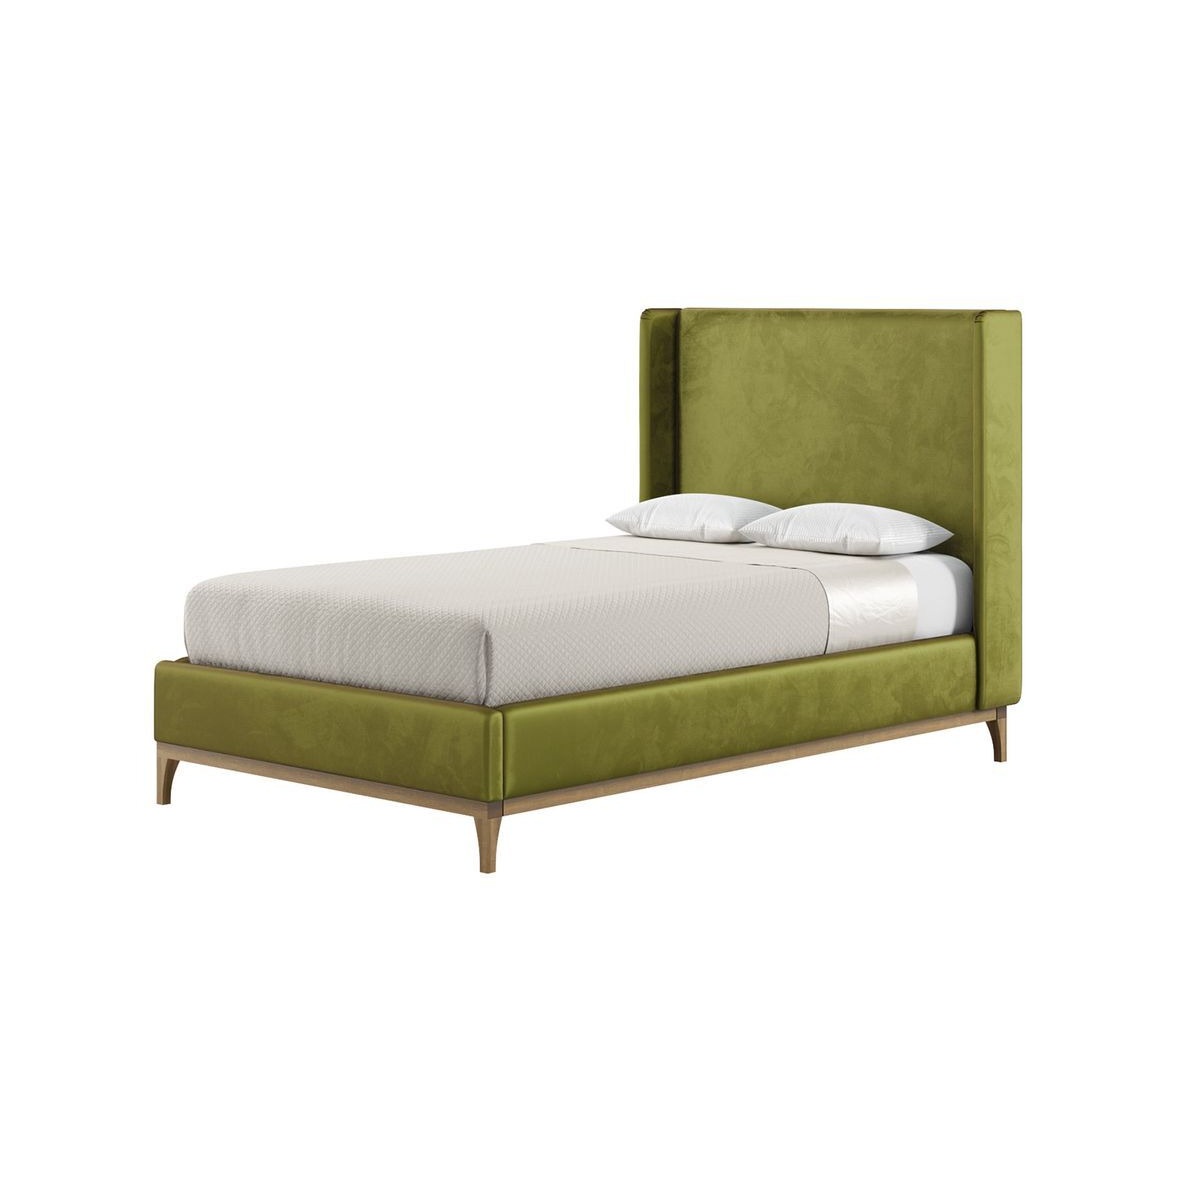 Diane 4ft Small Double Bed Frame with modern smooth wing headboard, olive green, Leg colour: wax black - image 1